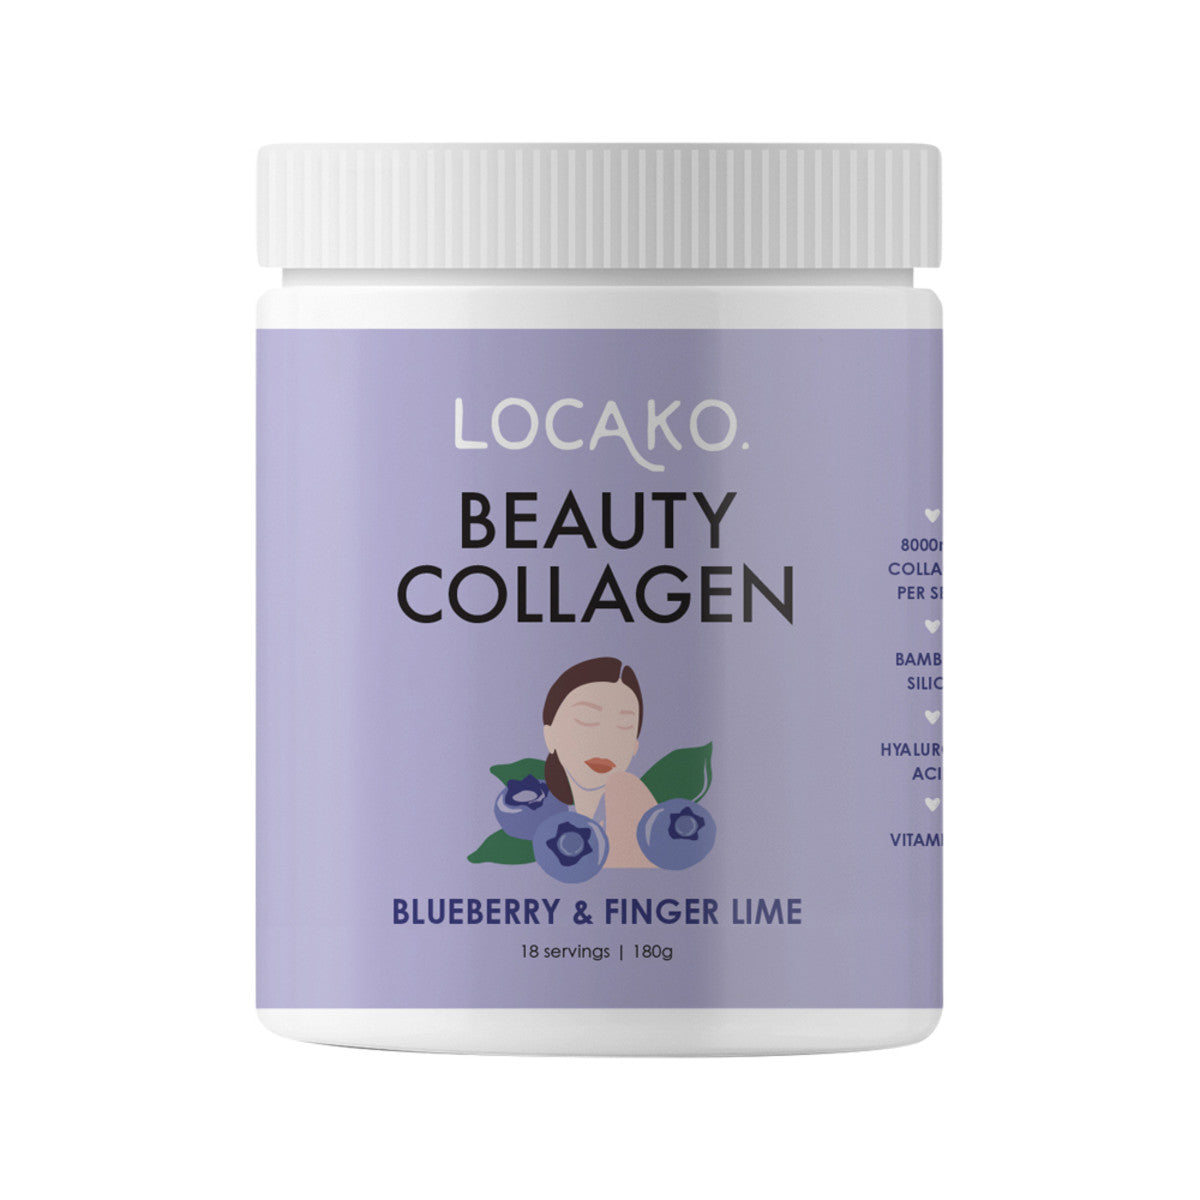 Locako Beauty Collagen Blueberry and Fingerlime